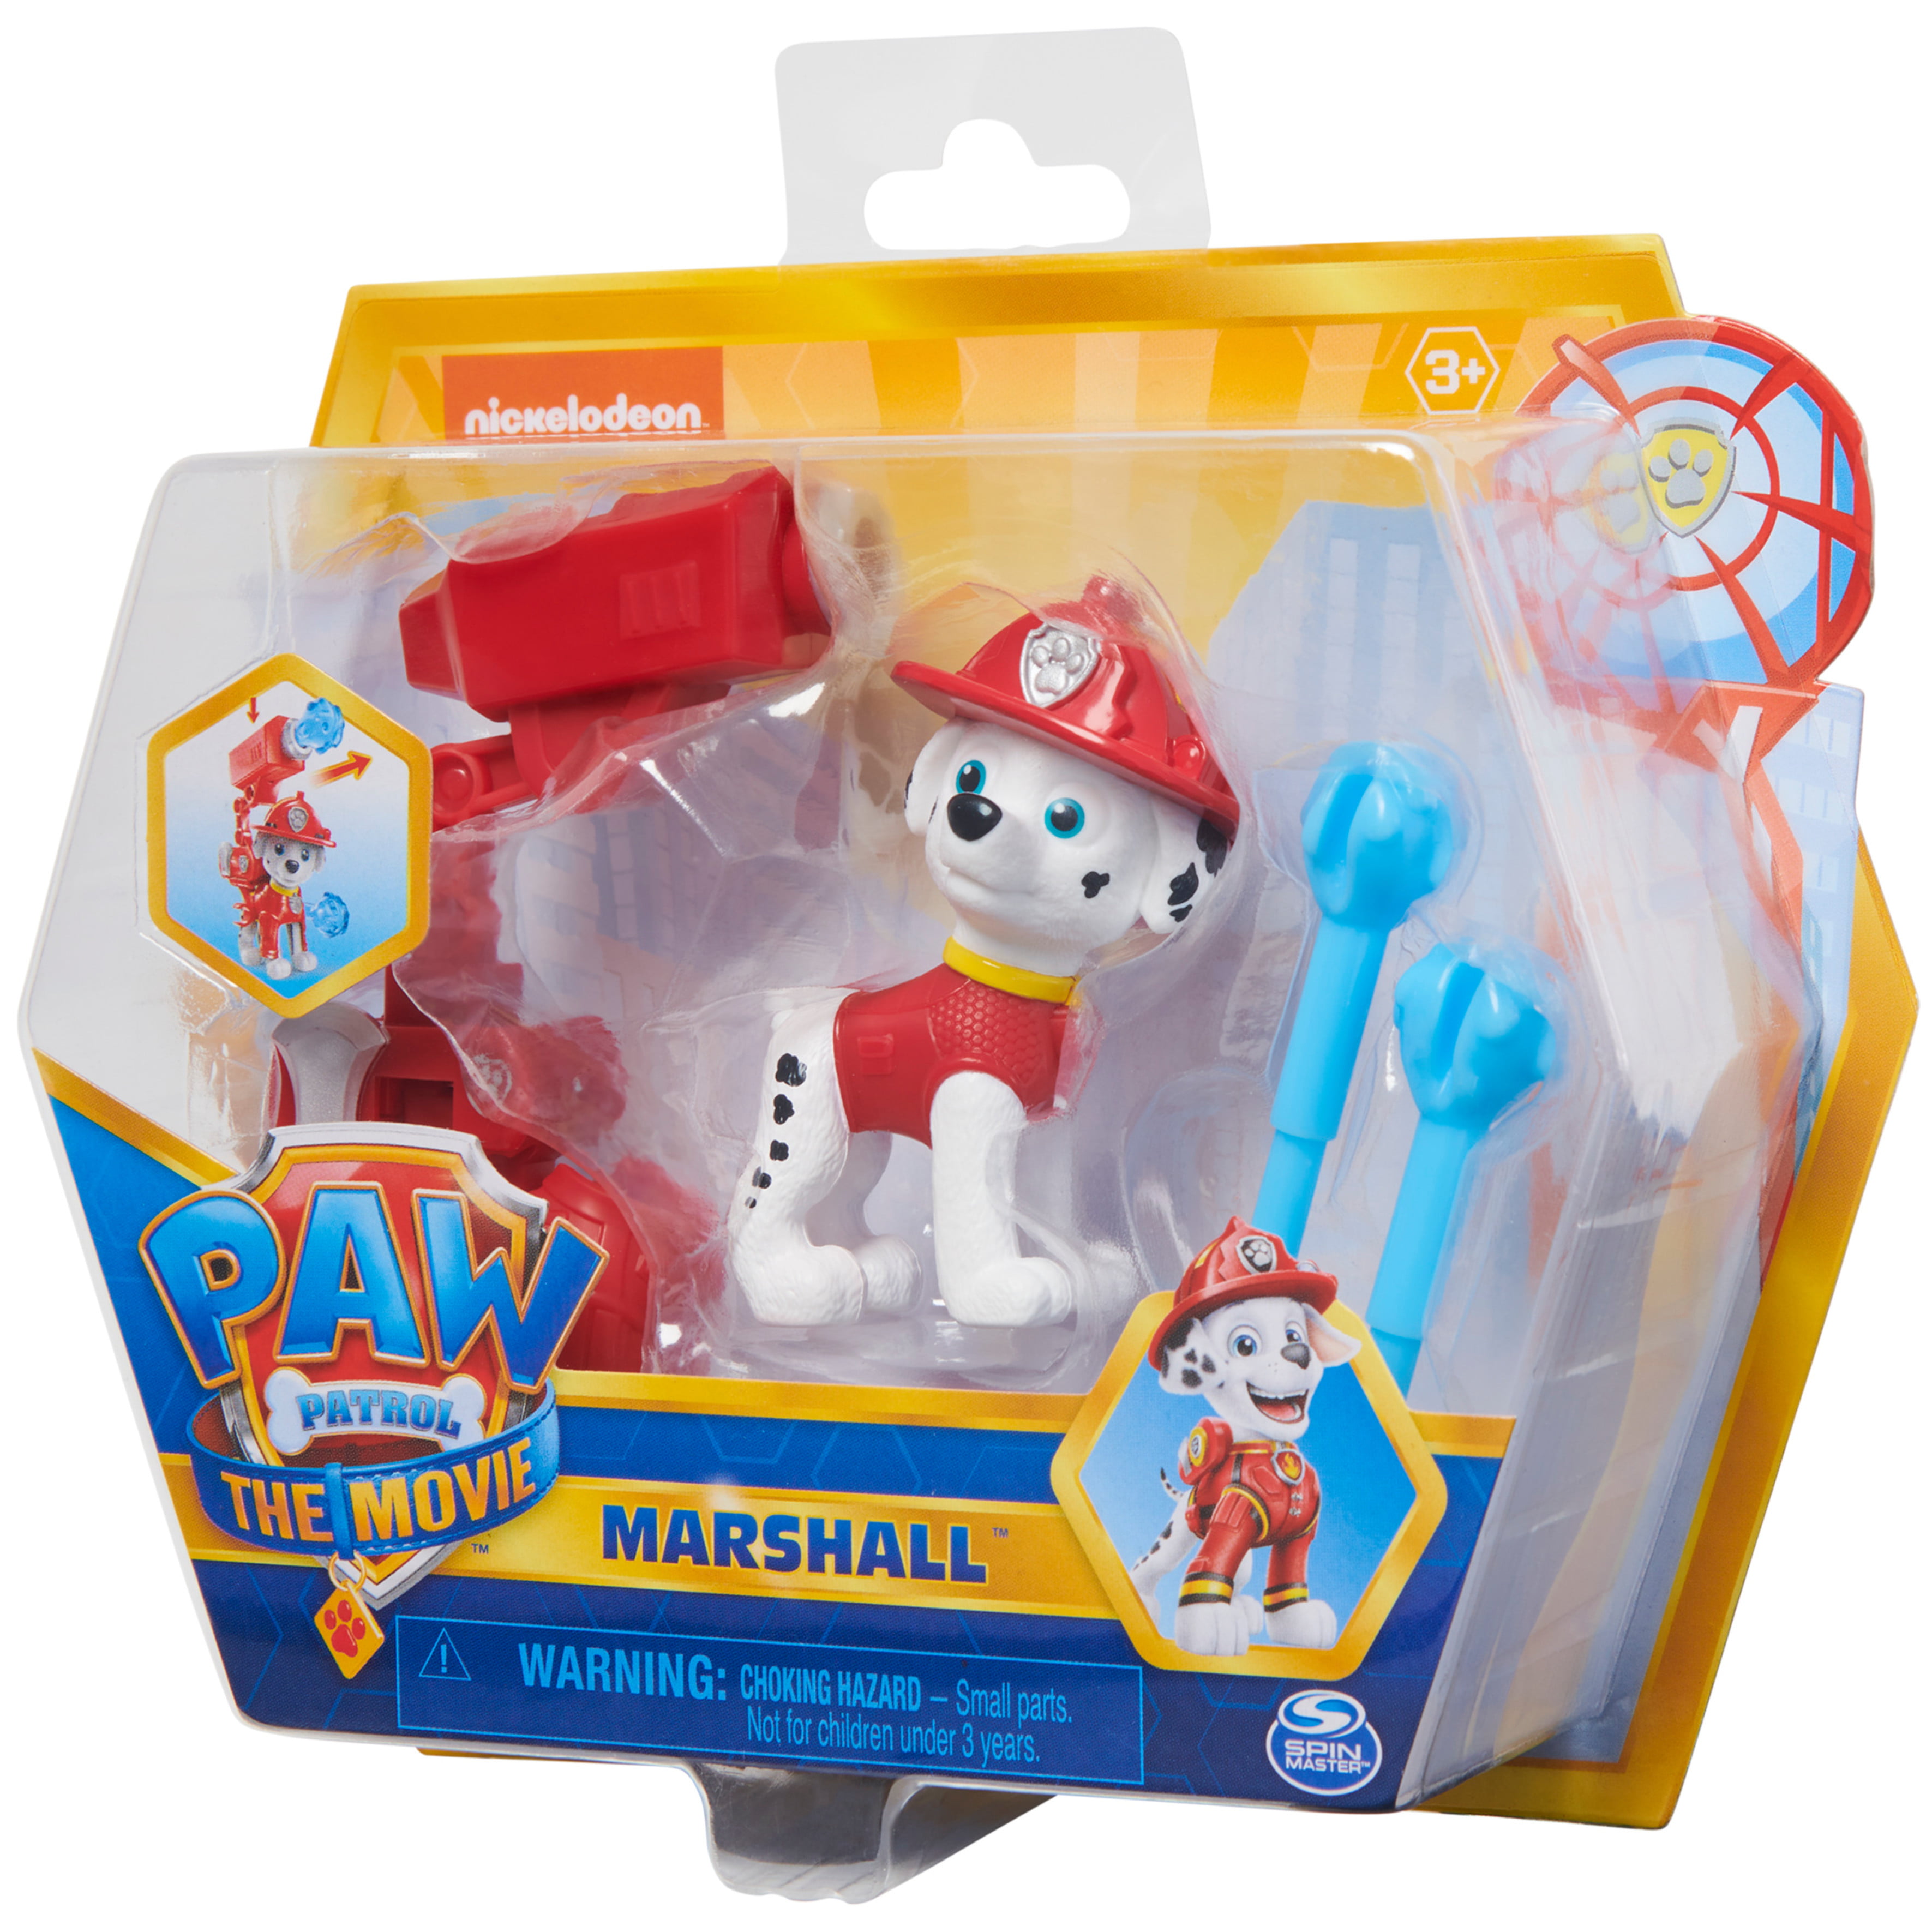 PAW Patrol, Marshall Action Figure with Clip-on Backpack